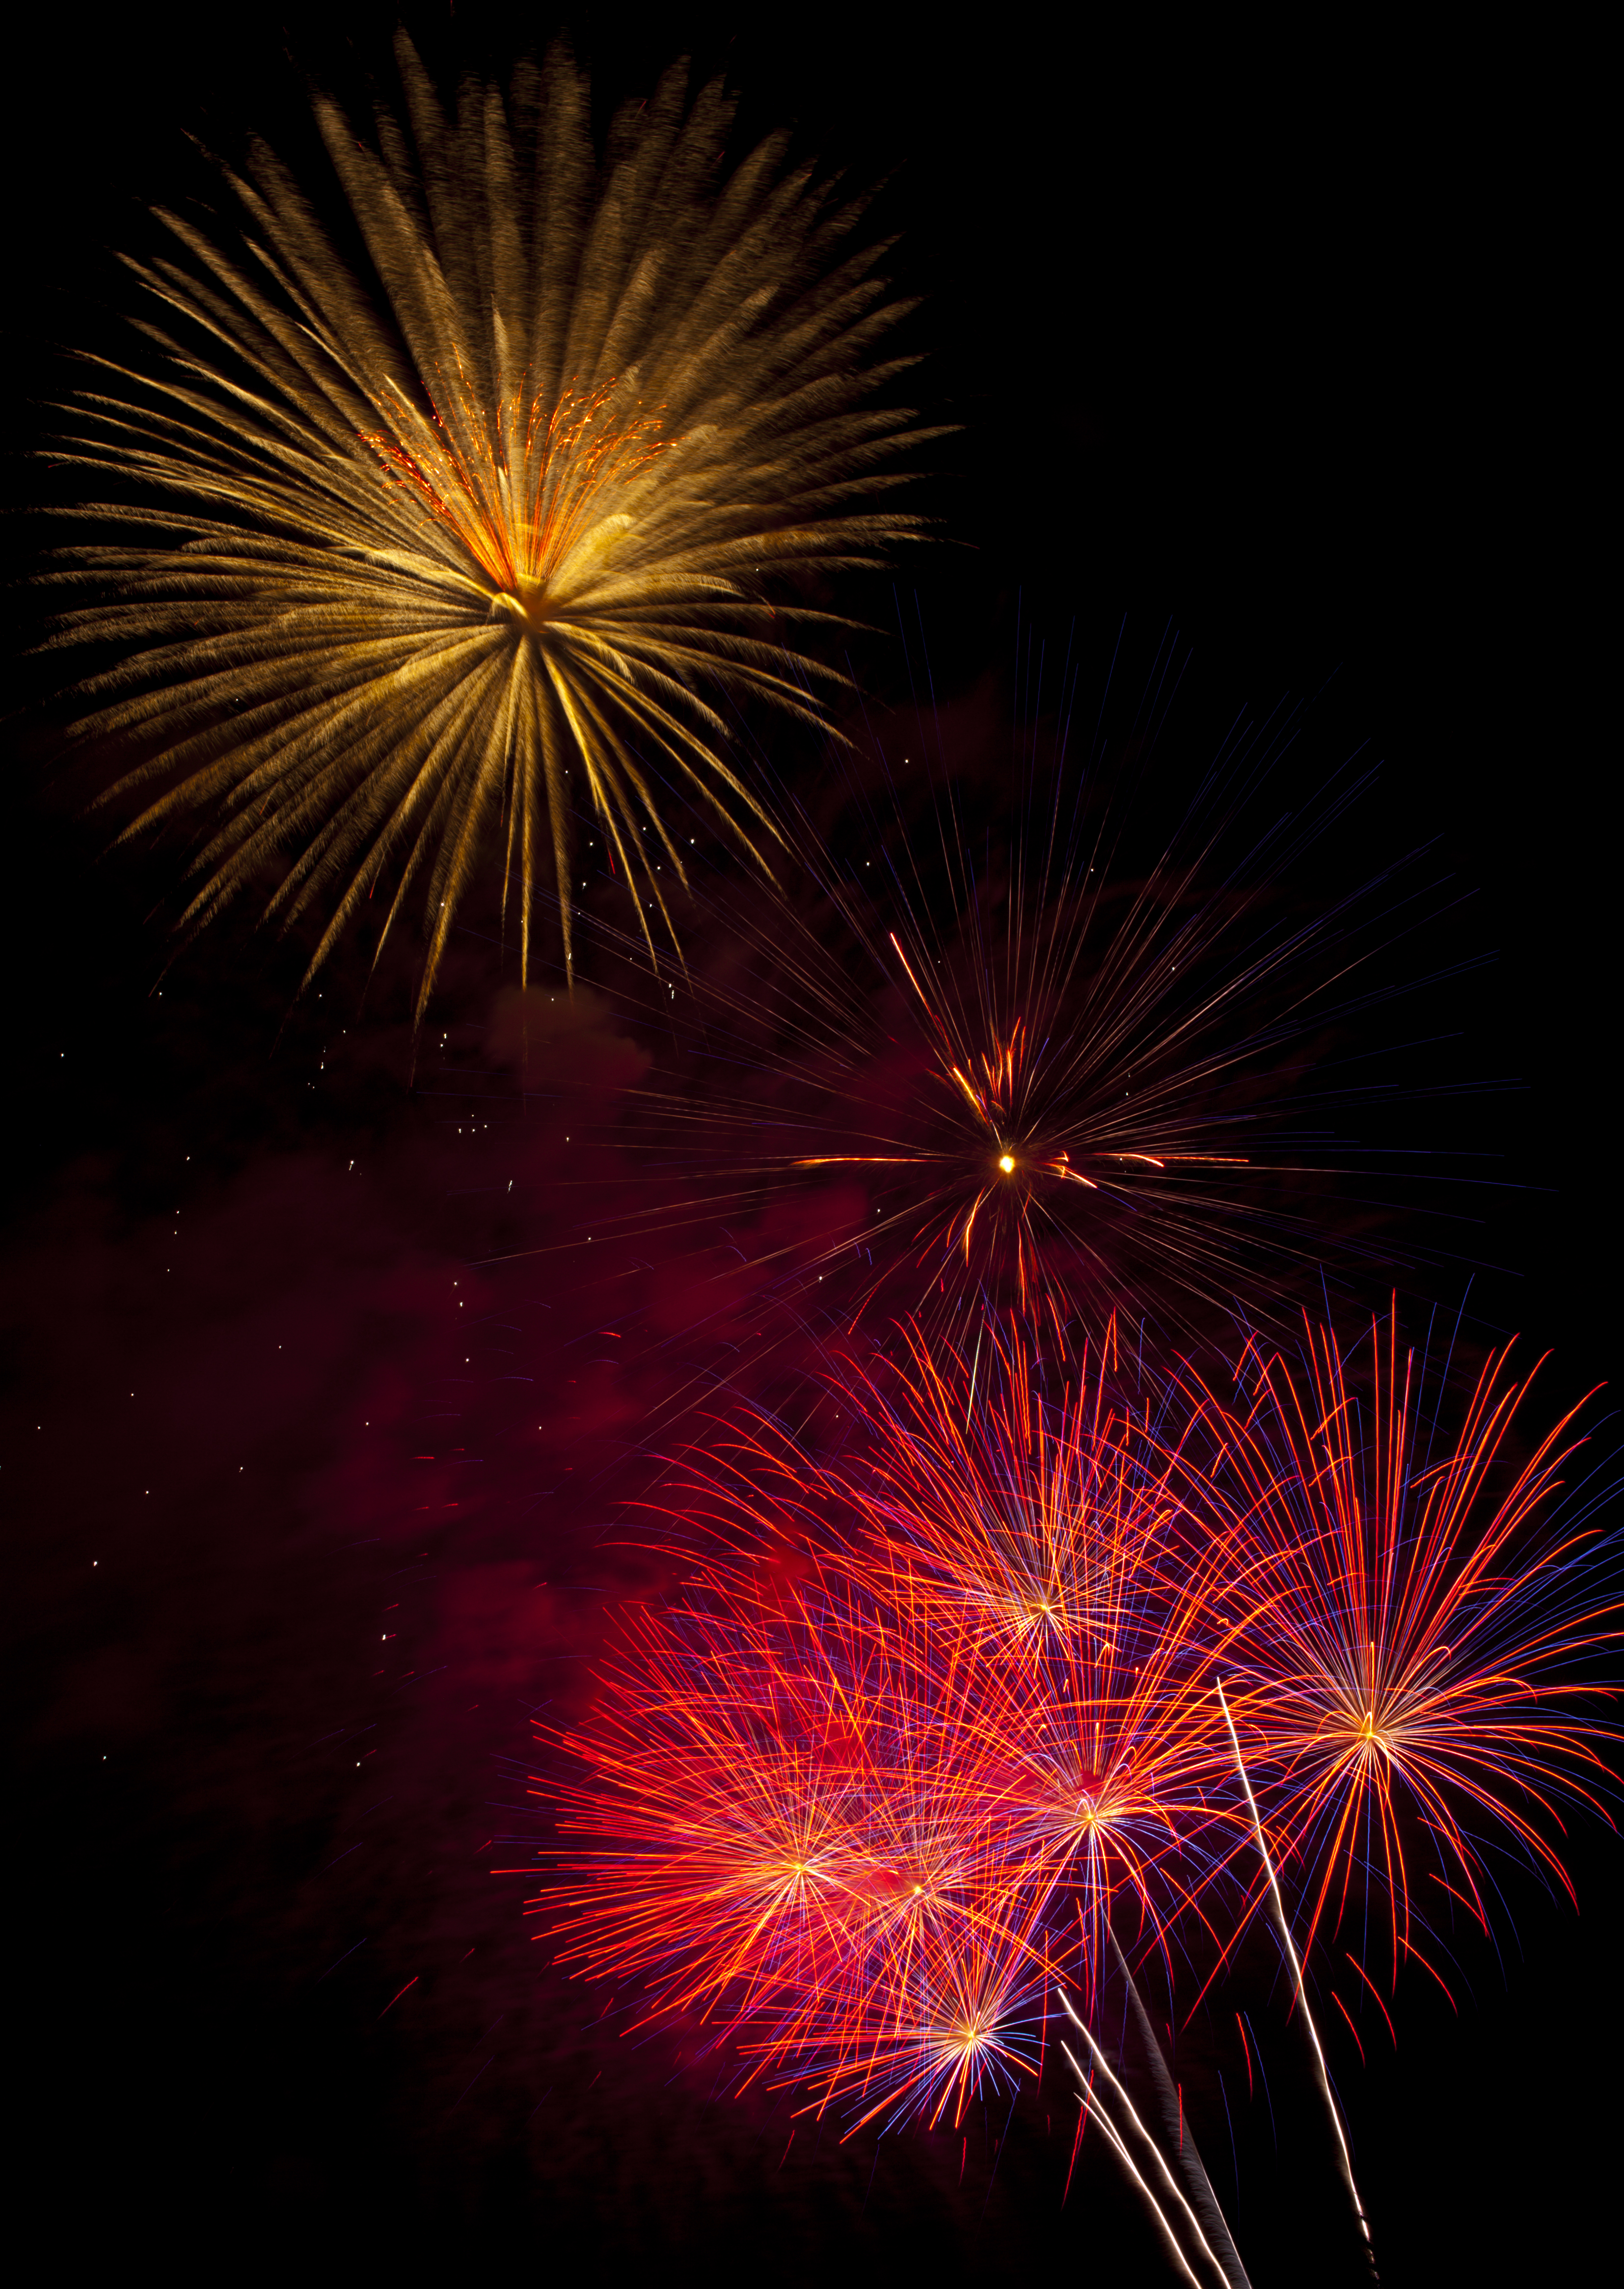 1080p Fireworks Hd Images